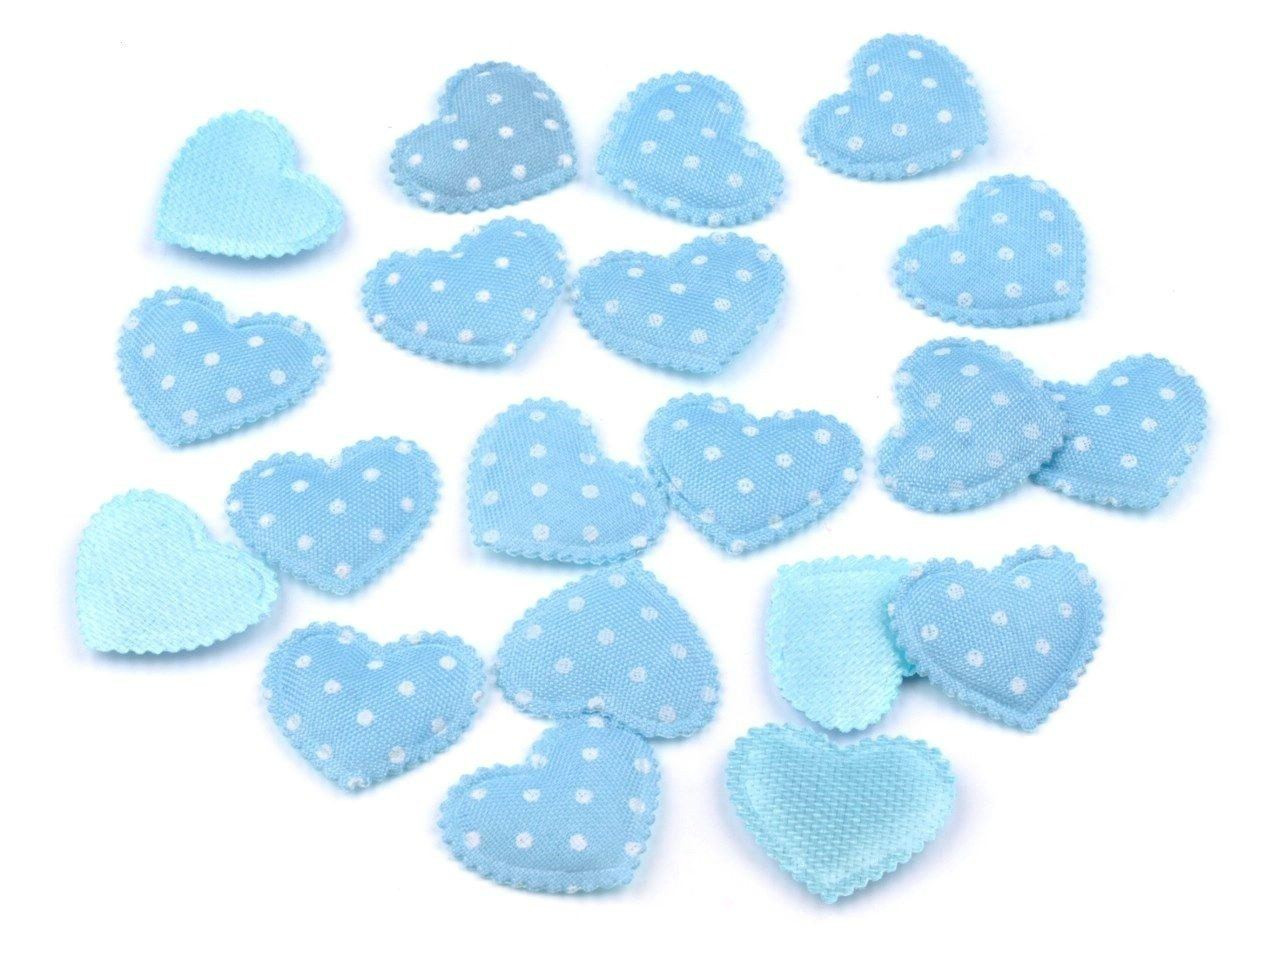 Heart Decoration with polka dots - Blue